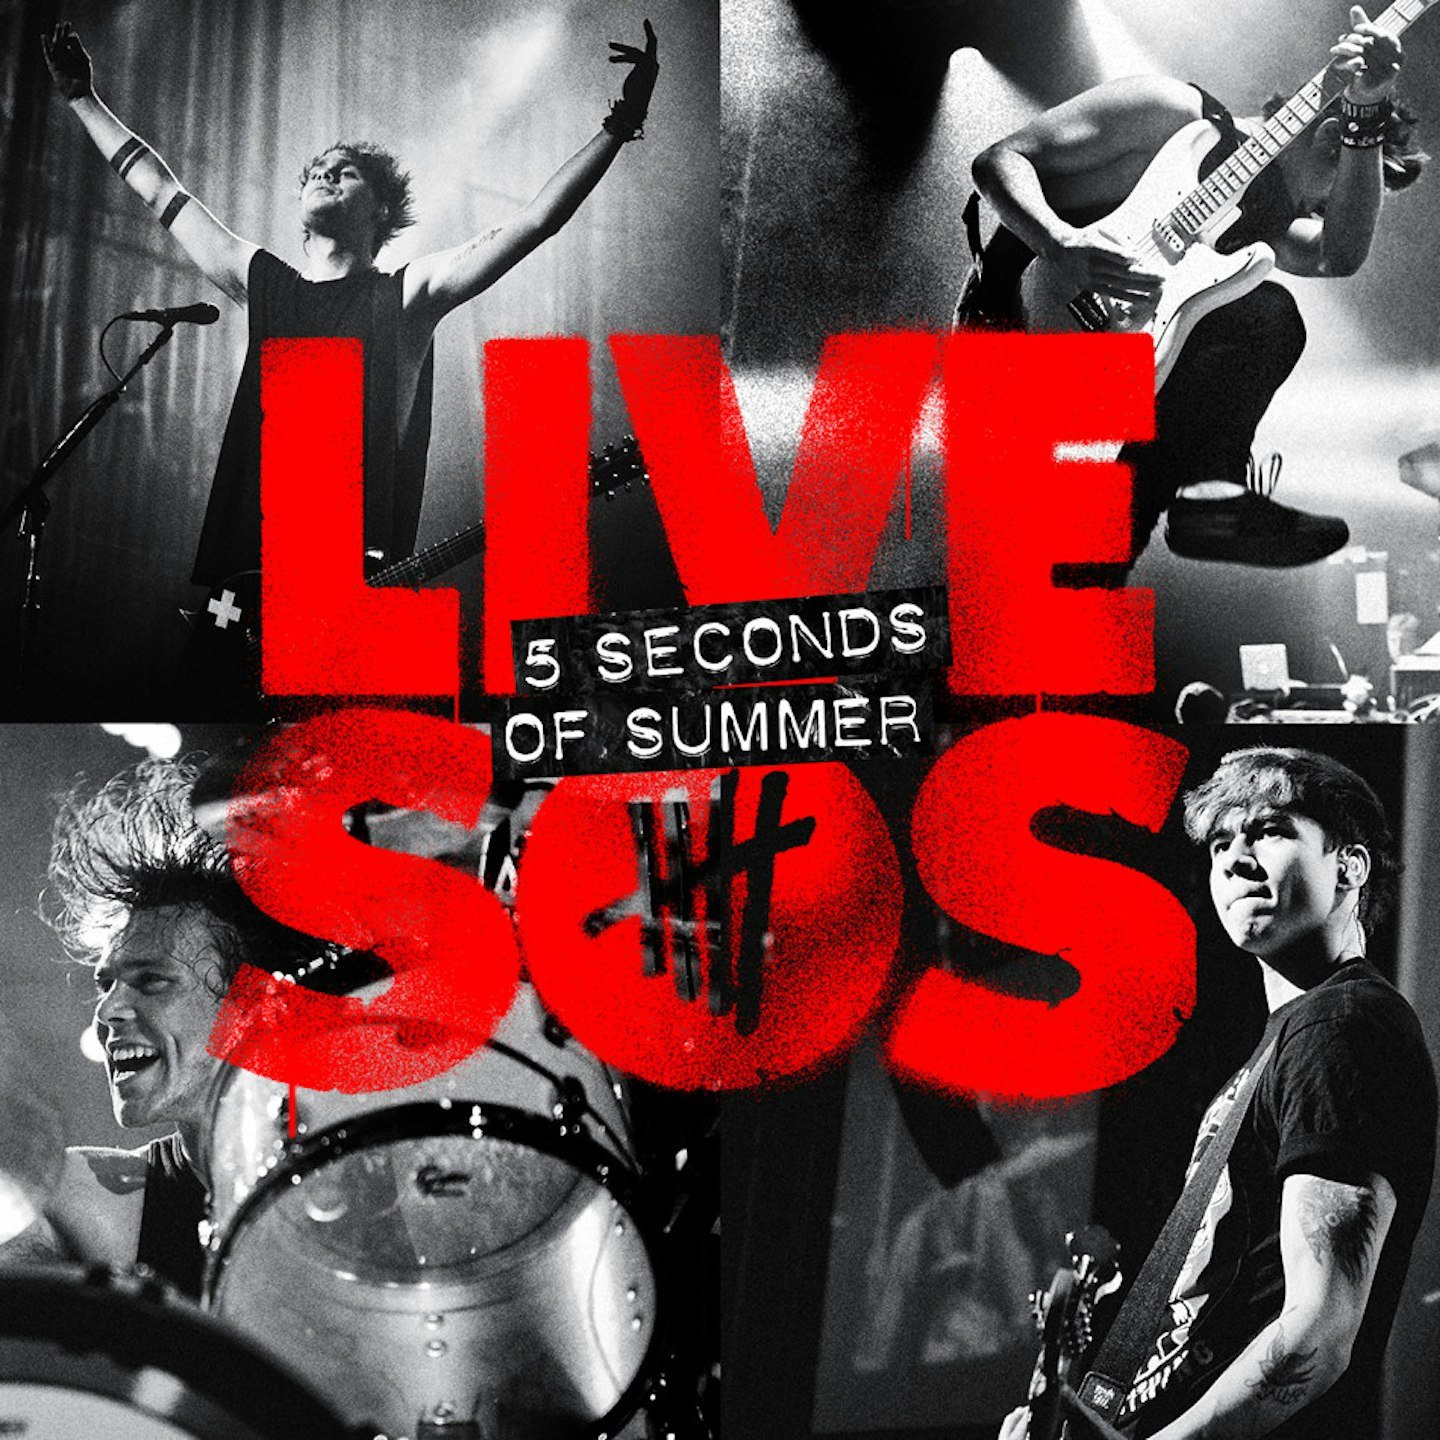 LIVESOS will be the latest album released by 5SOS.